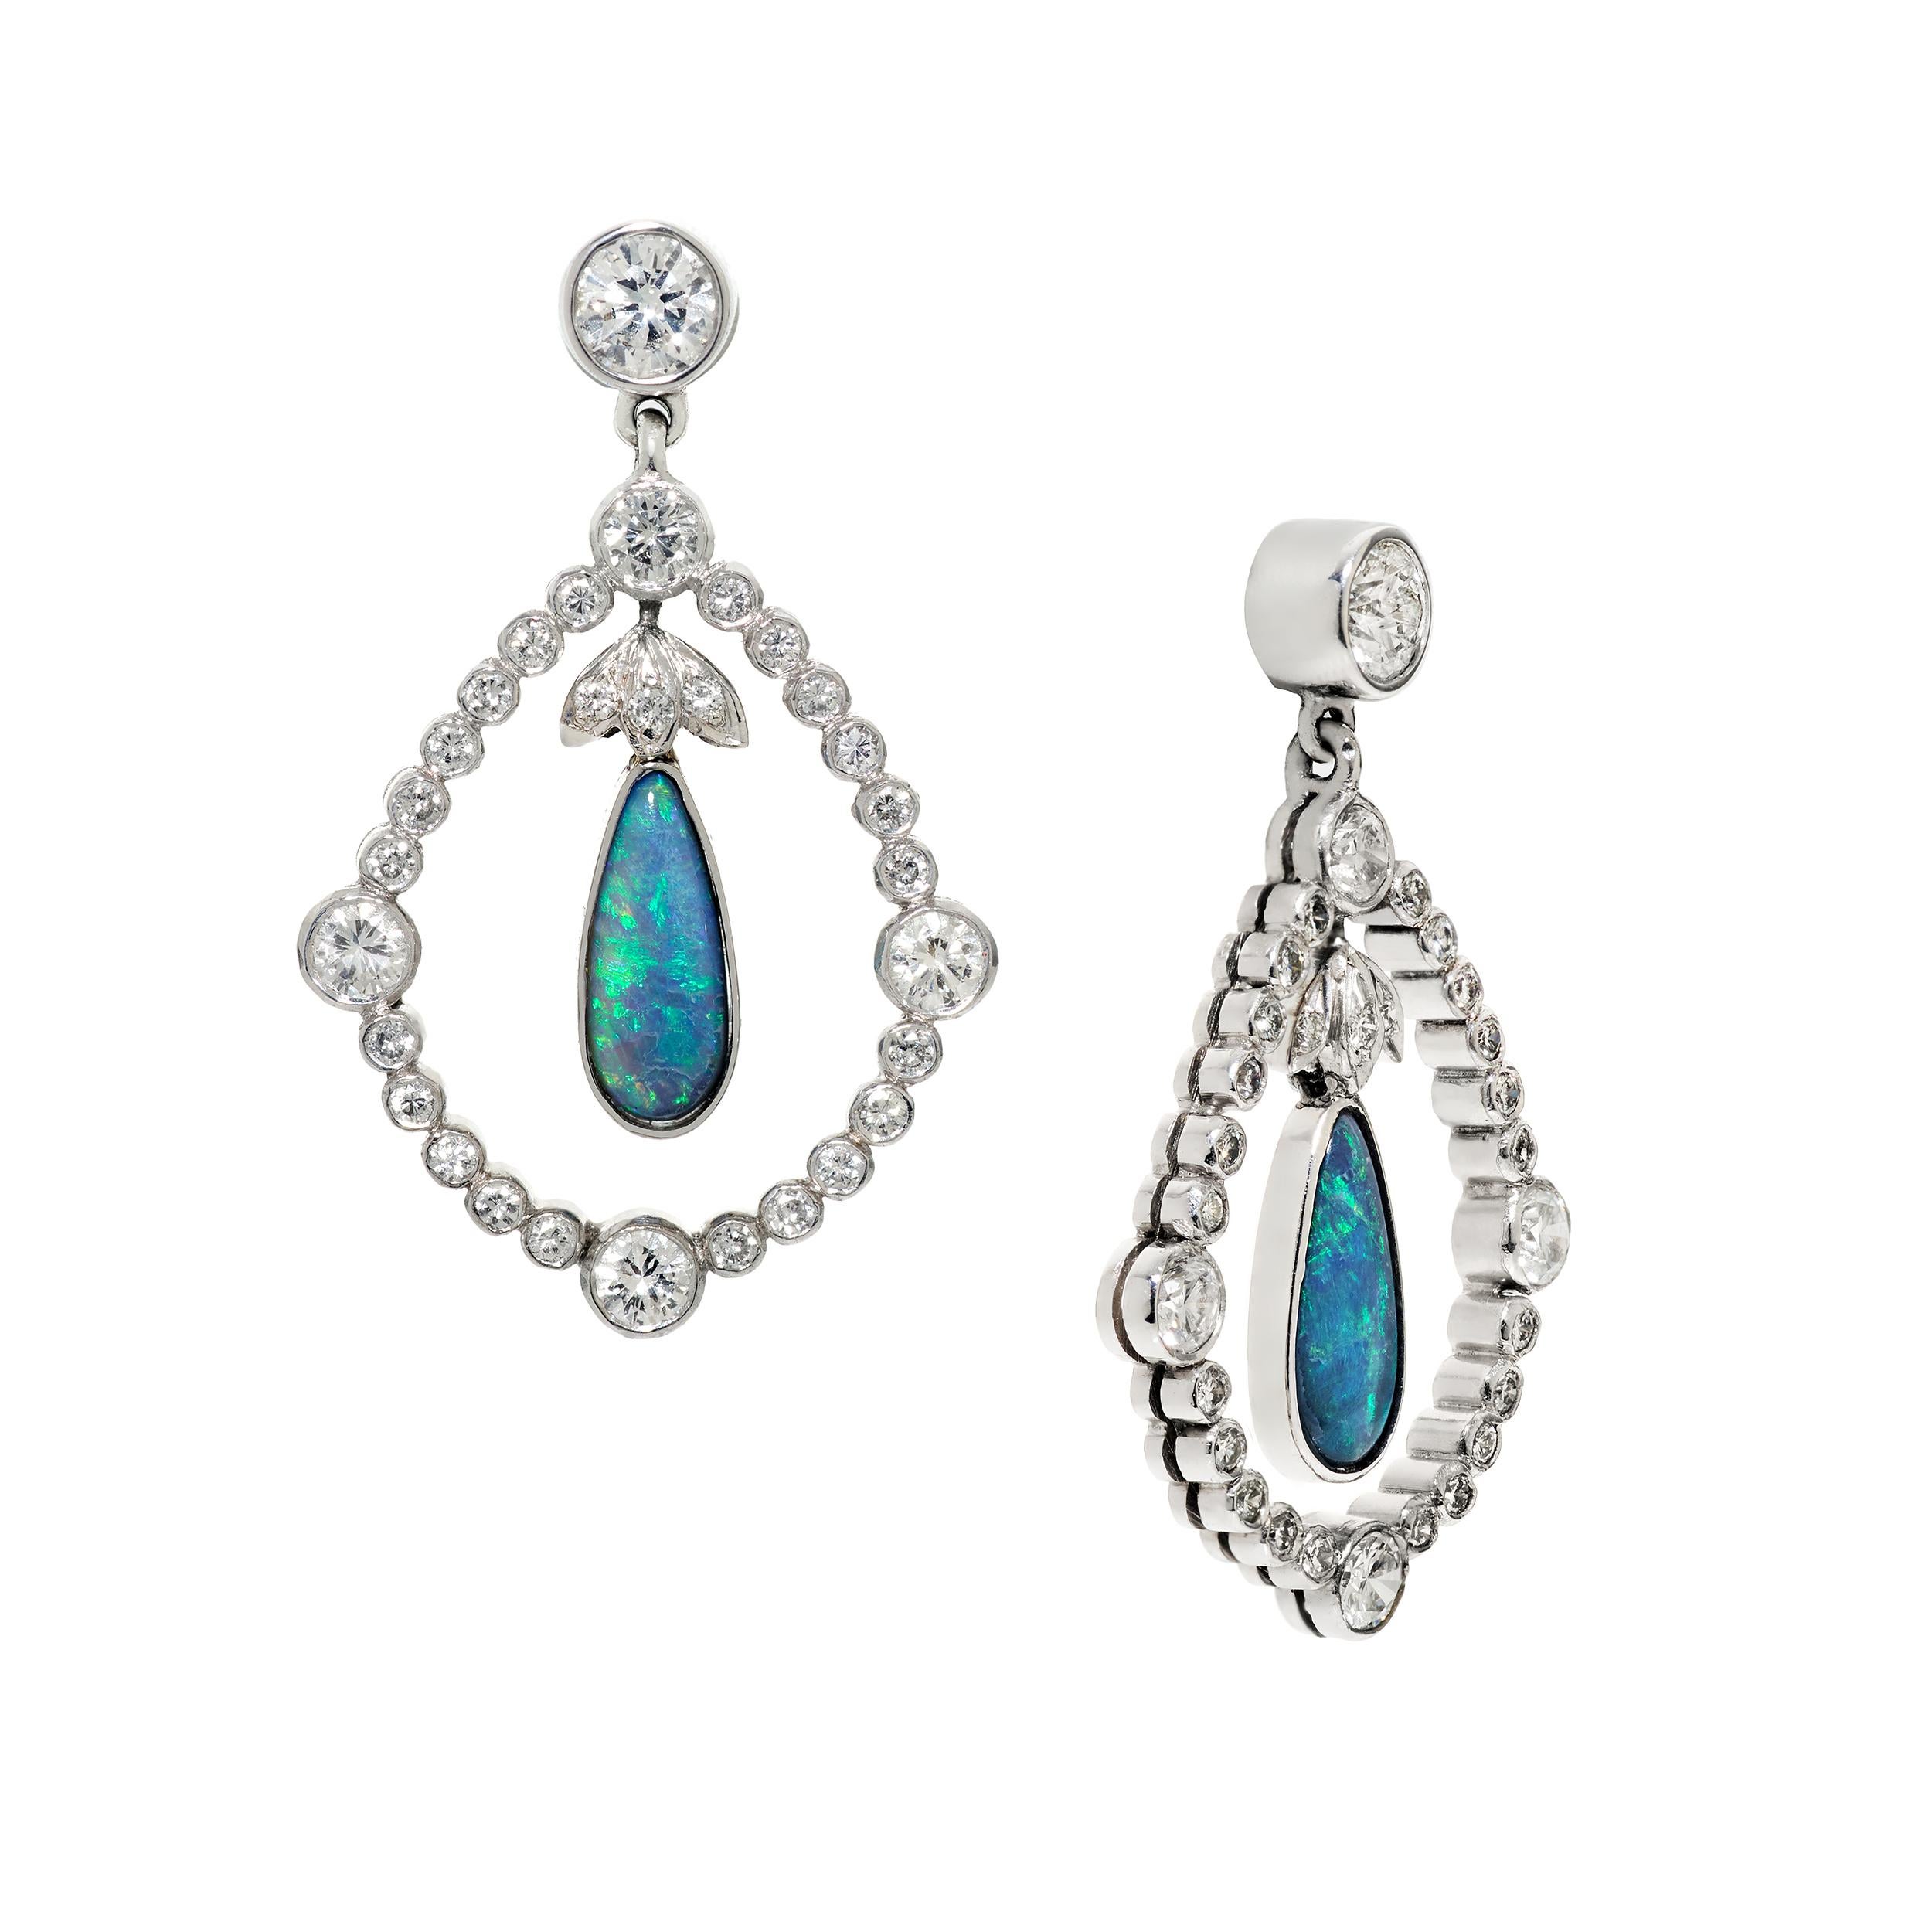 Vintage wreath earrings were the inspiration for this piece.  They were recreated in modern form by adding 1.10 Carats of Elongated Pear-shaped Black Opals and the addition of more Diamonds weighing approximately 1.96 Carats.  Total gem weight is